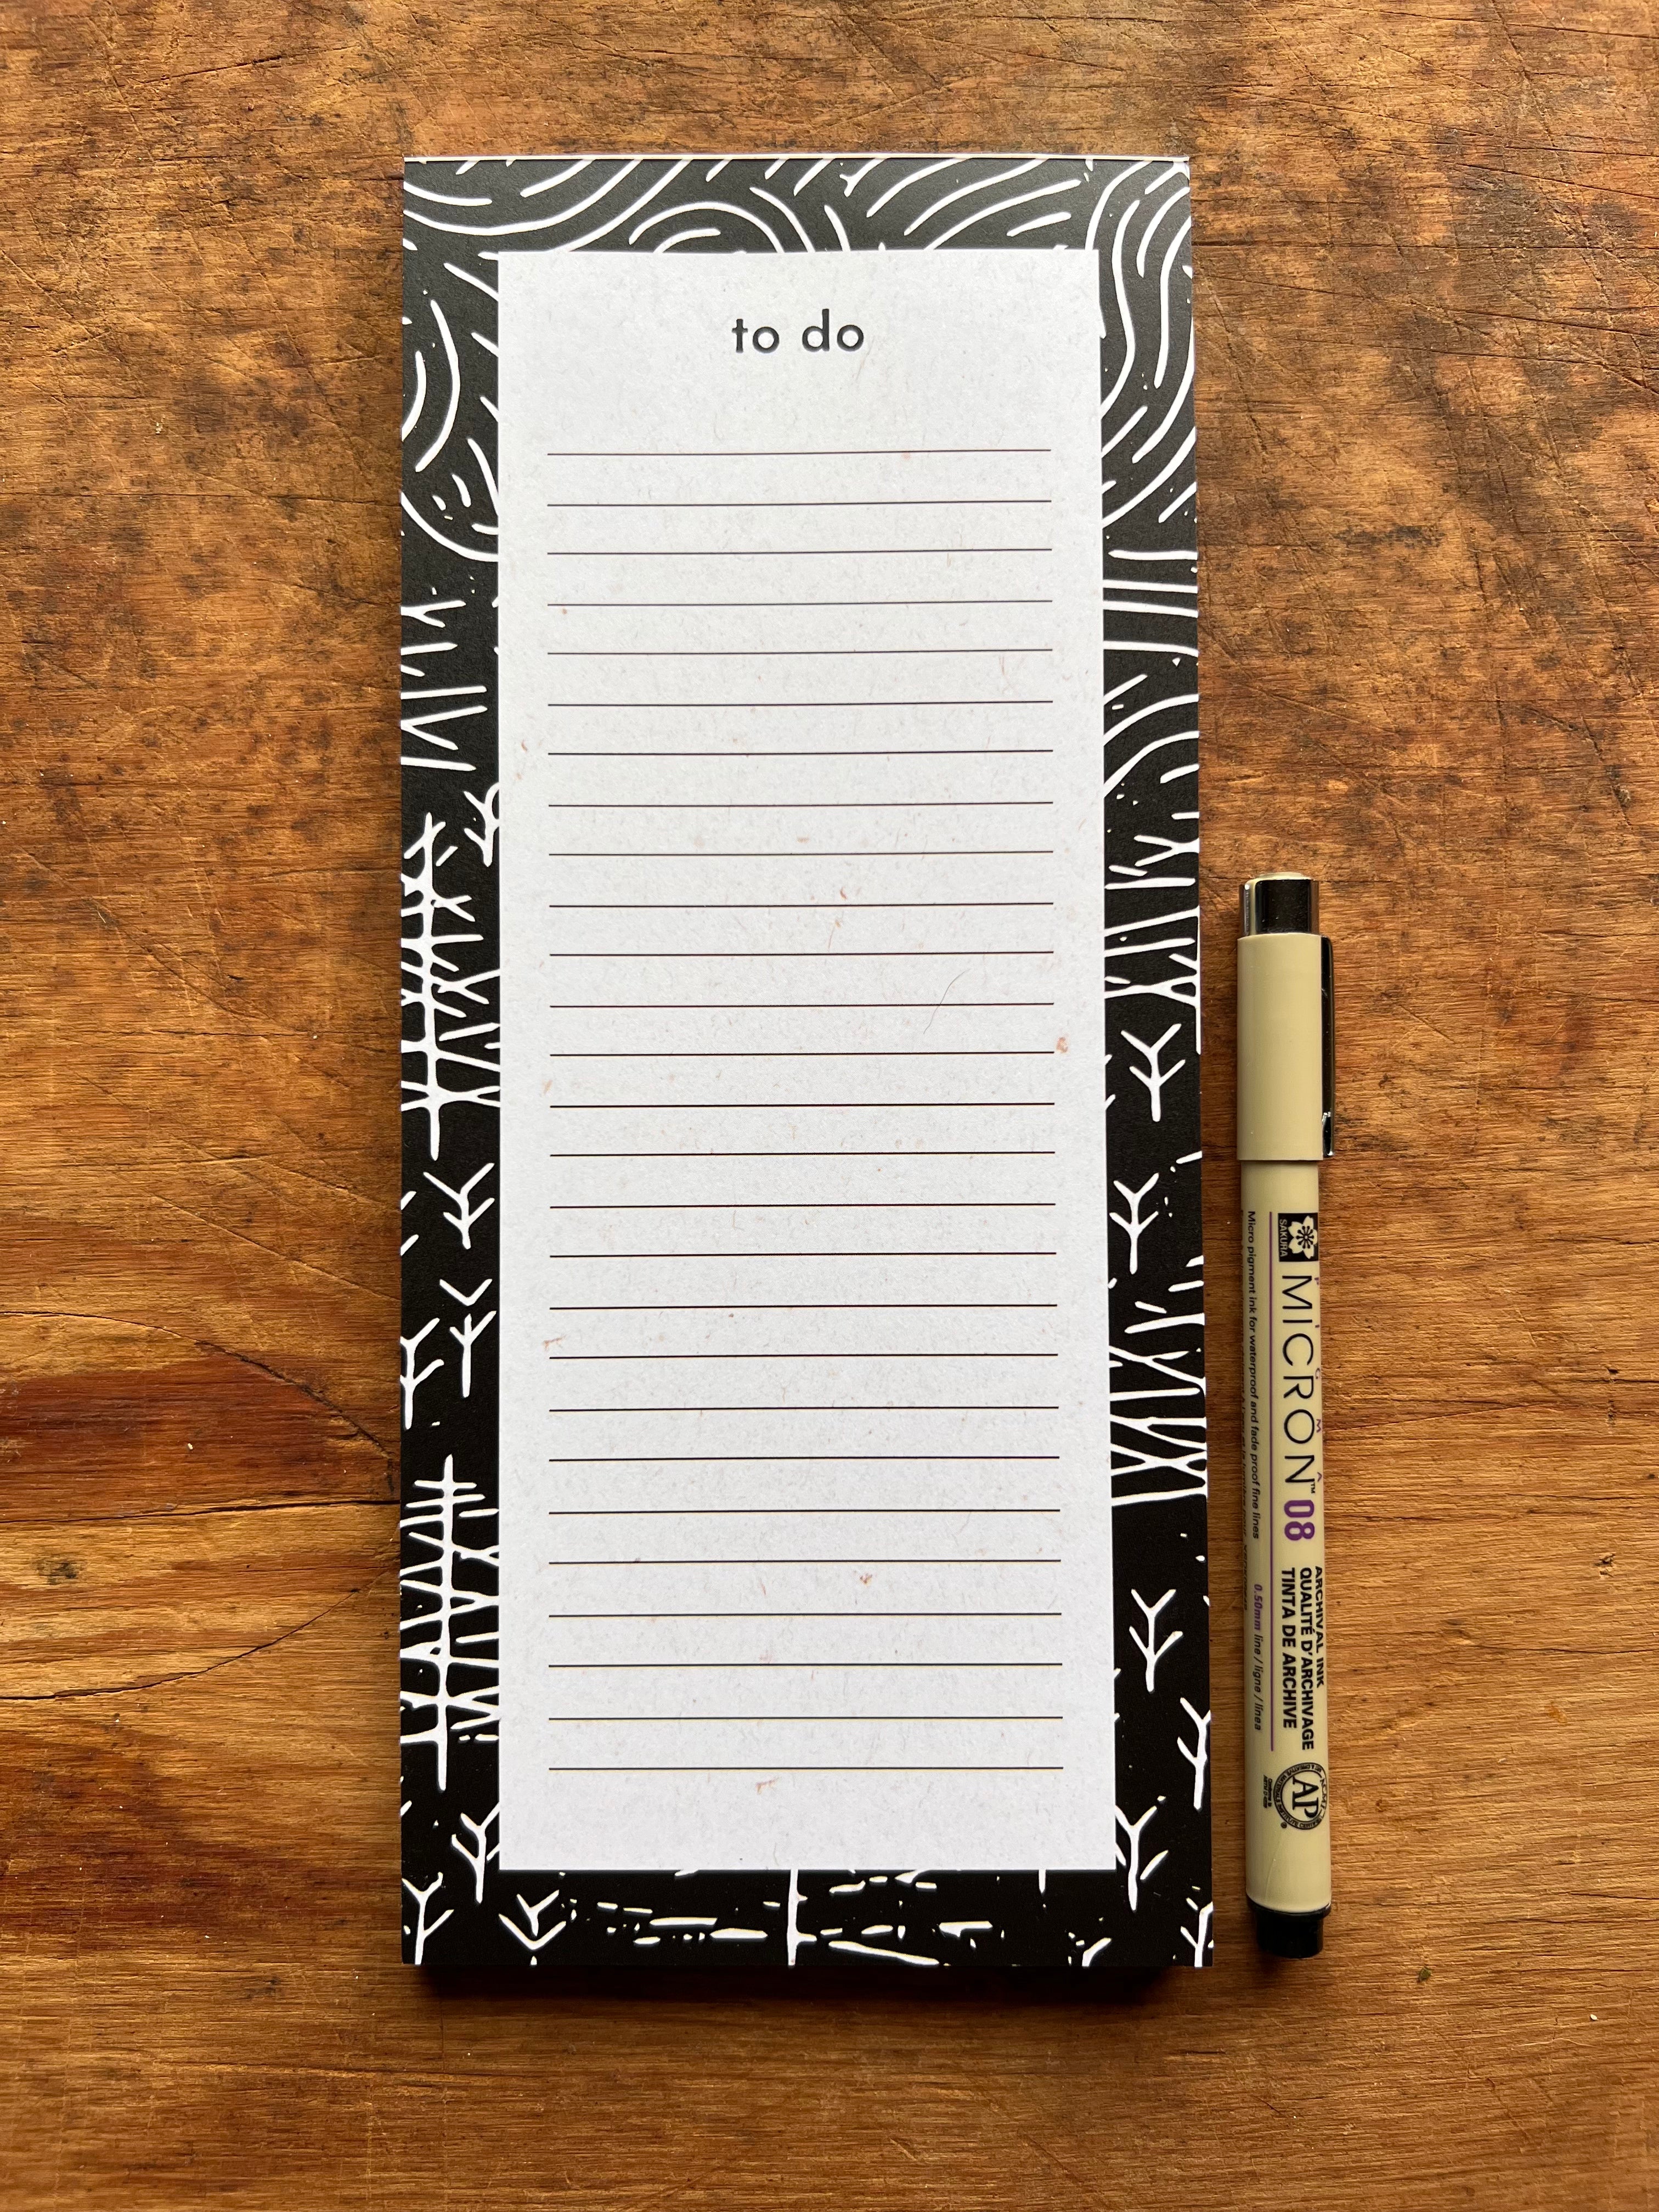 Just laminate a To-do list so you don't waste paper for your To-Do